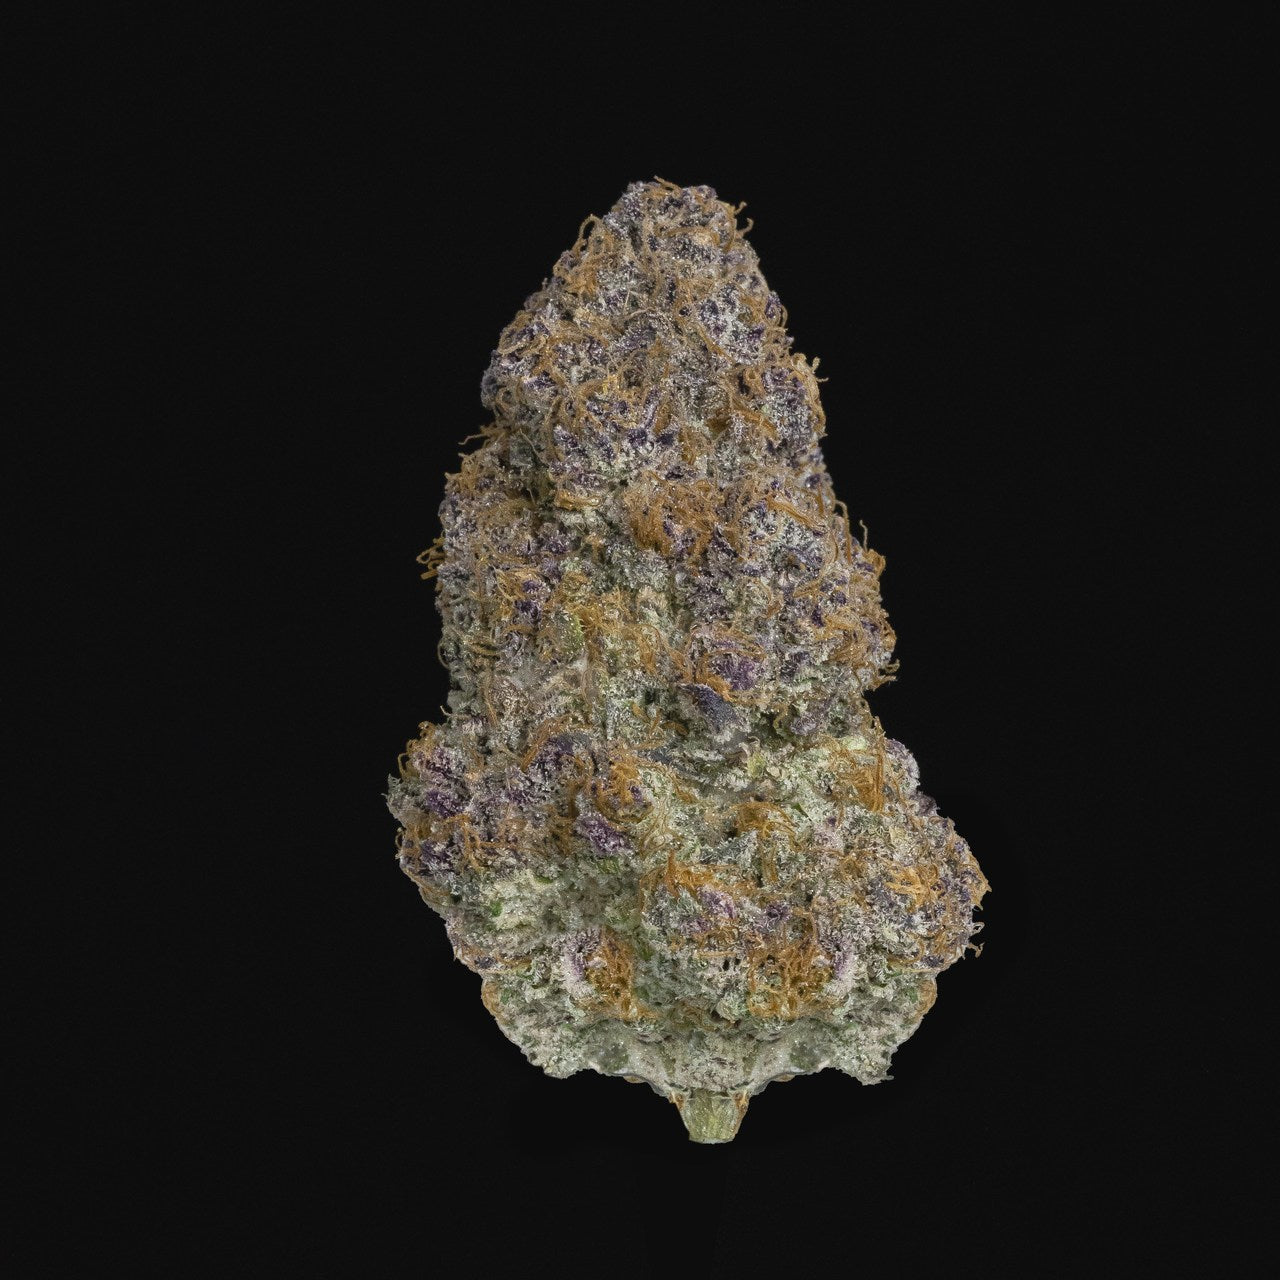 A bright, purple-haired nug of the London Purpz strain stands against a black background.